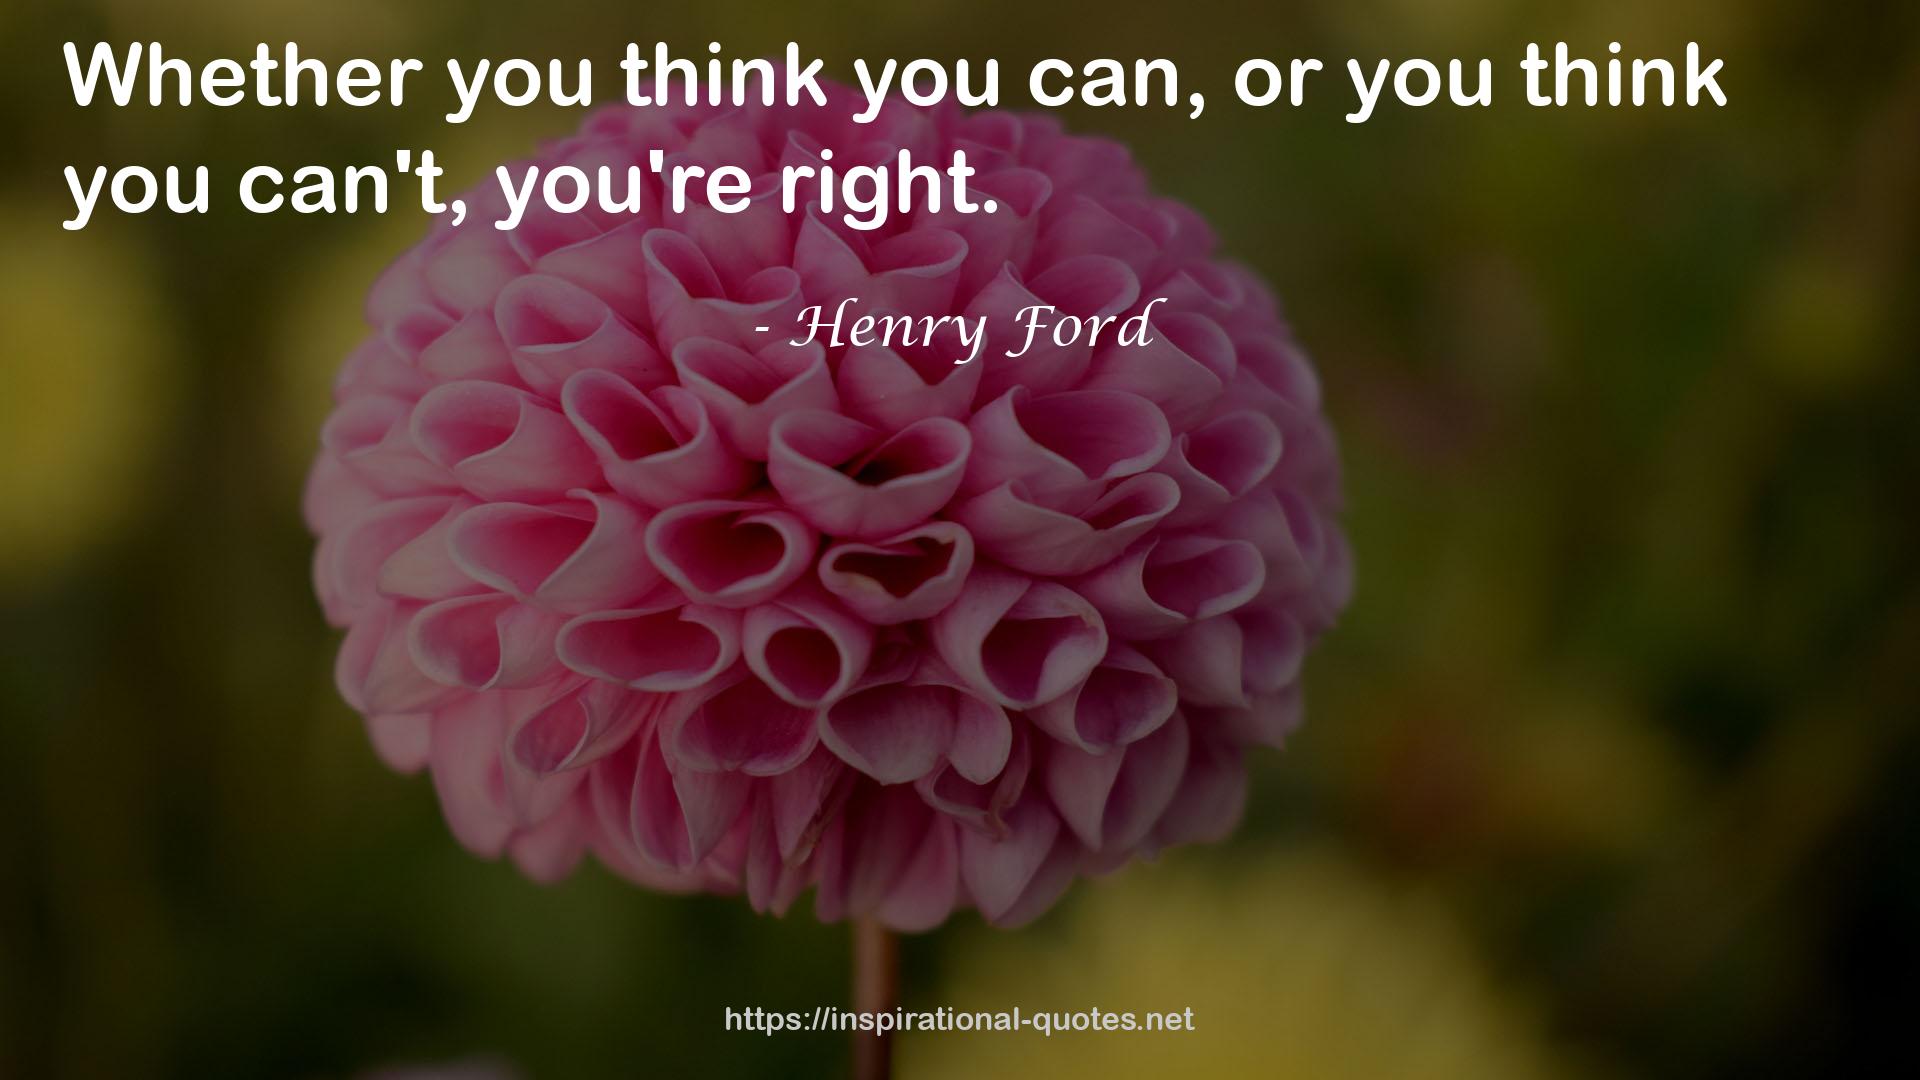 Henry Ford QUOTES